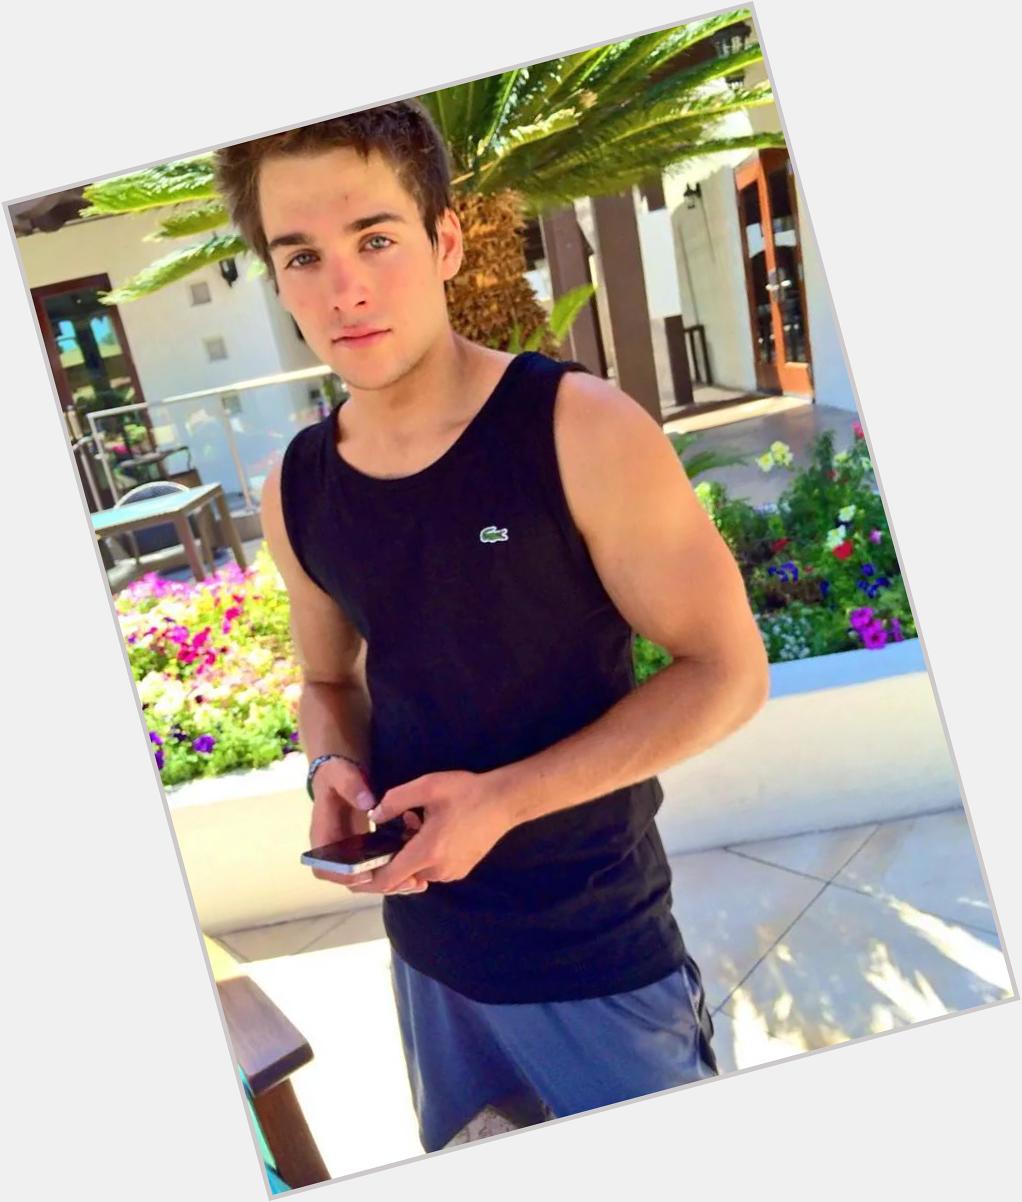 Happy Birthday Dylan Sprayberry !! You\re 17 now but youre still our little baby !!  